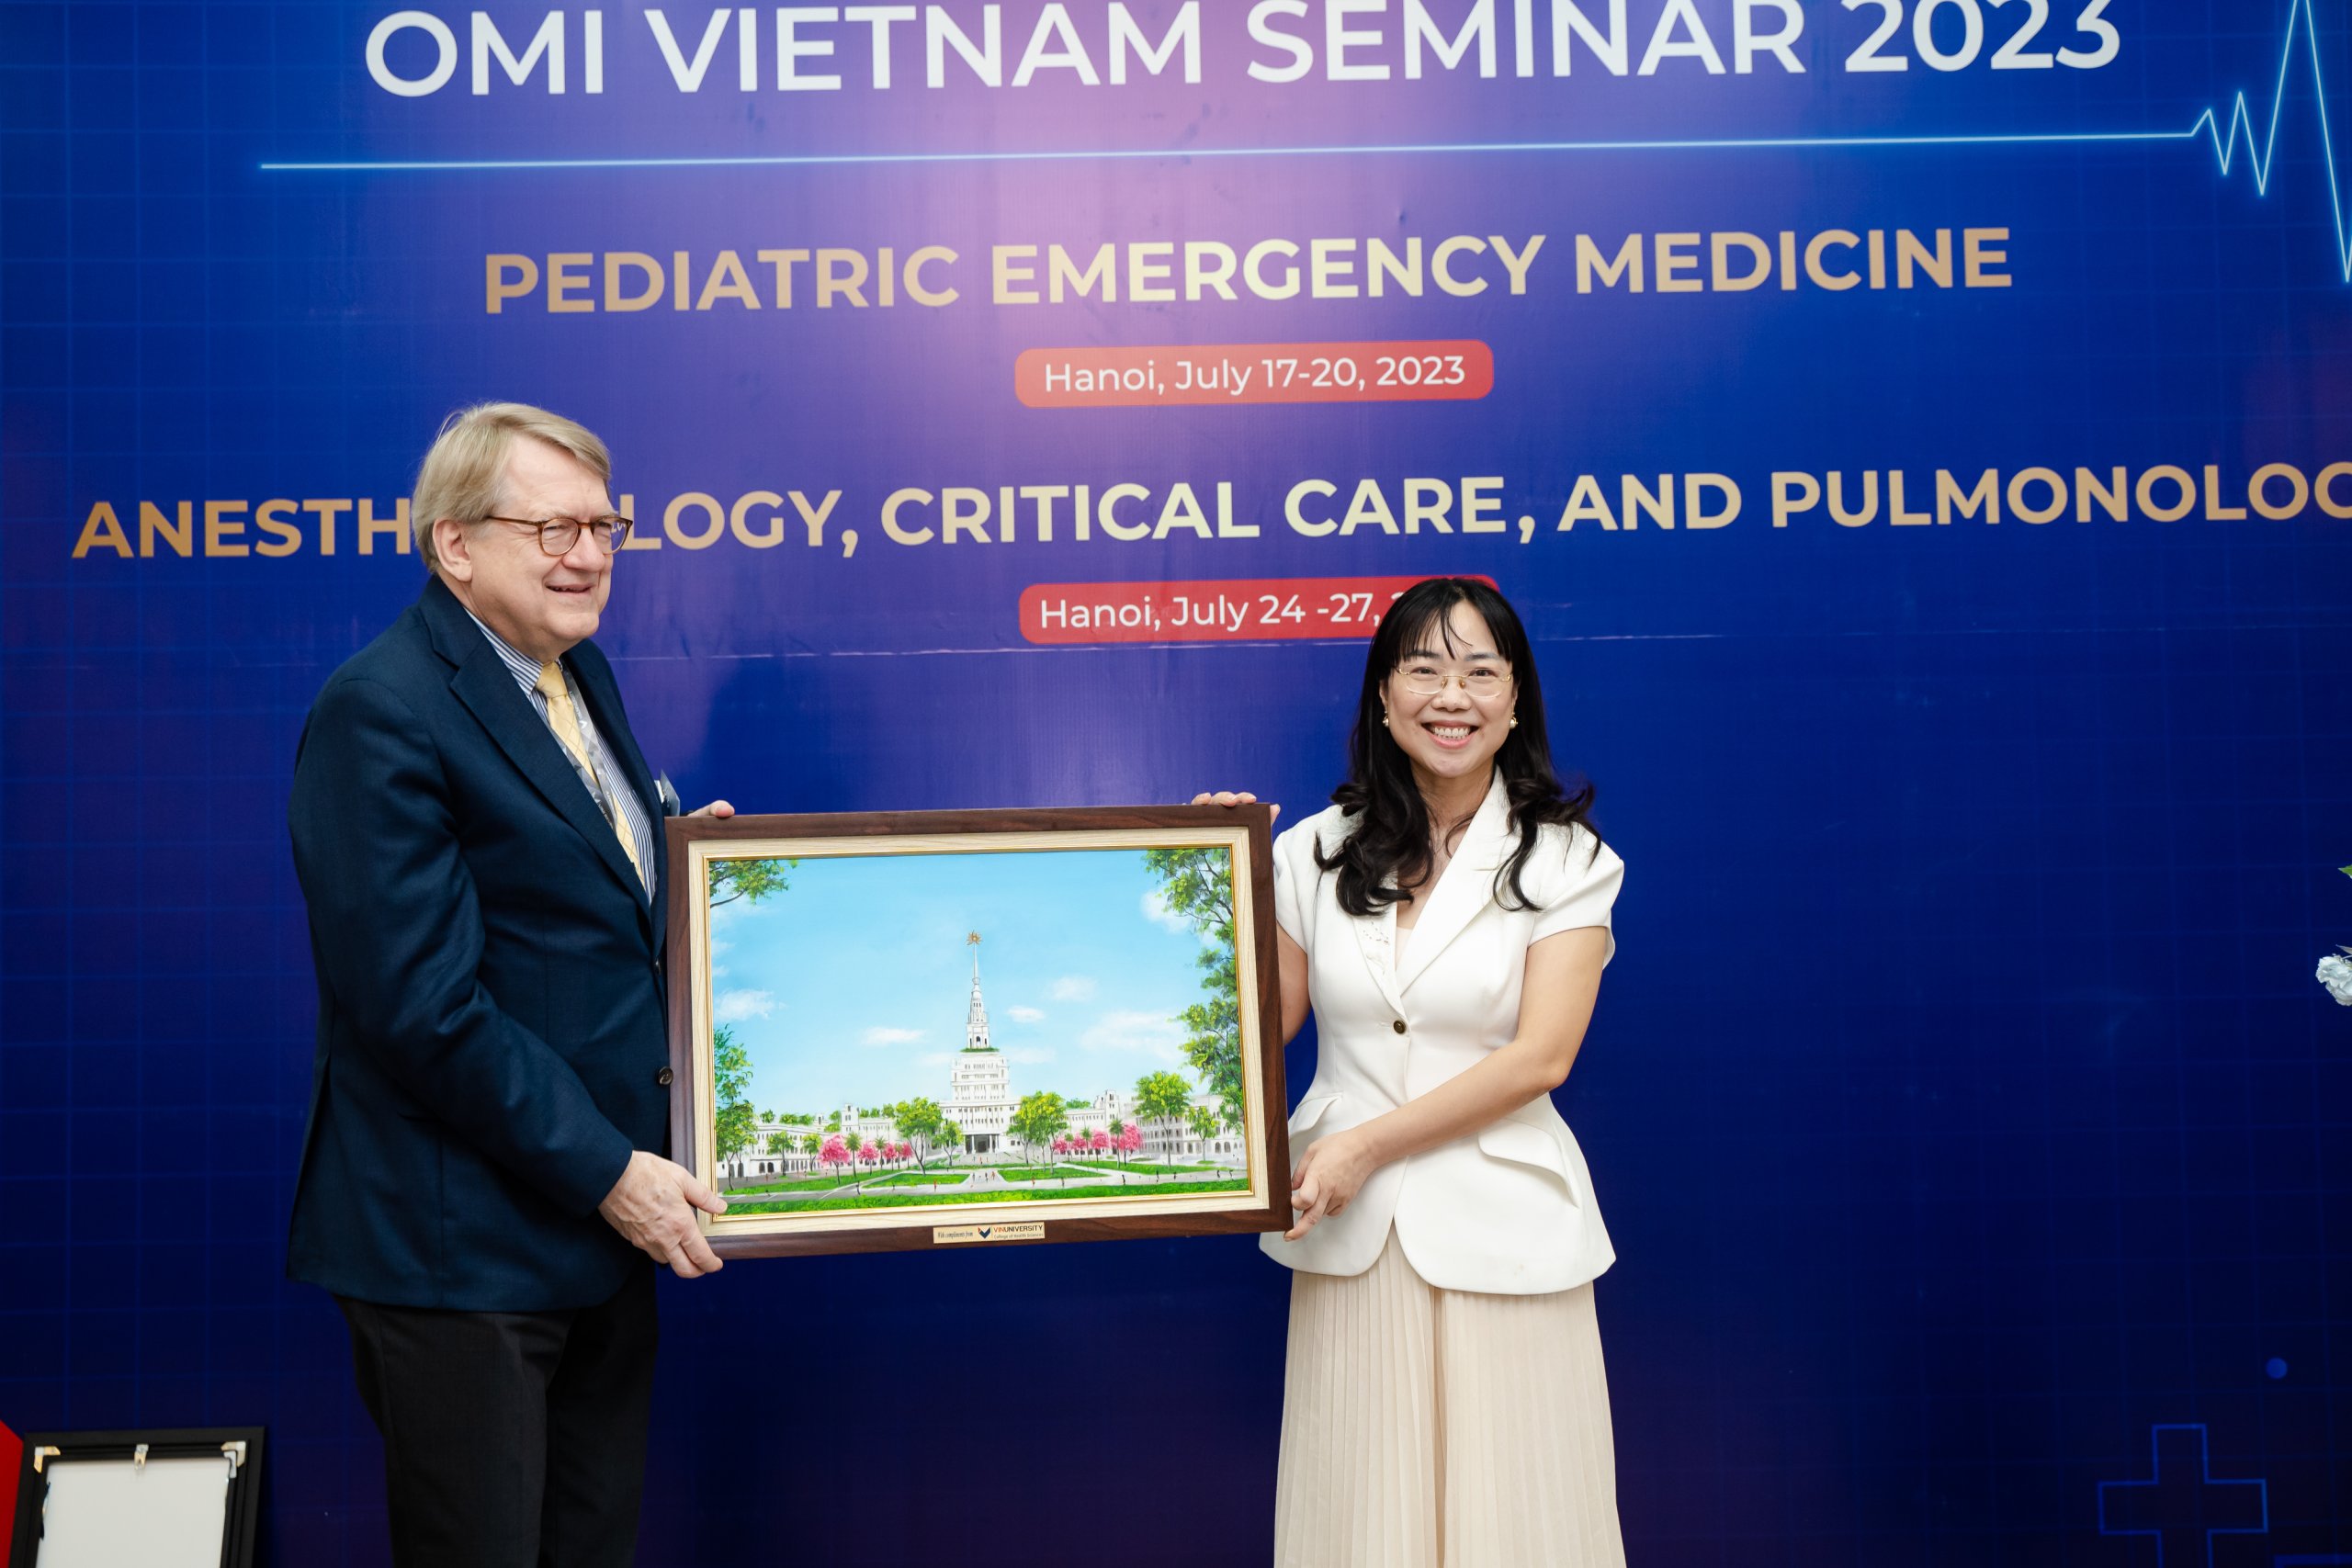 Dr. Le Mai Lan, Vice Chairwoman of the Vingroup Vice Chairwoman of Vingroup JSC and President of the VinUniversity Council, presenting a gift to Dr. Wolfgang Aulitzky, OMI CEO